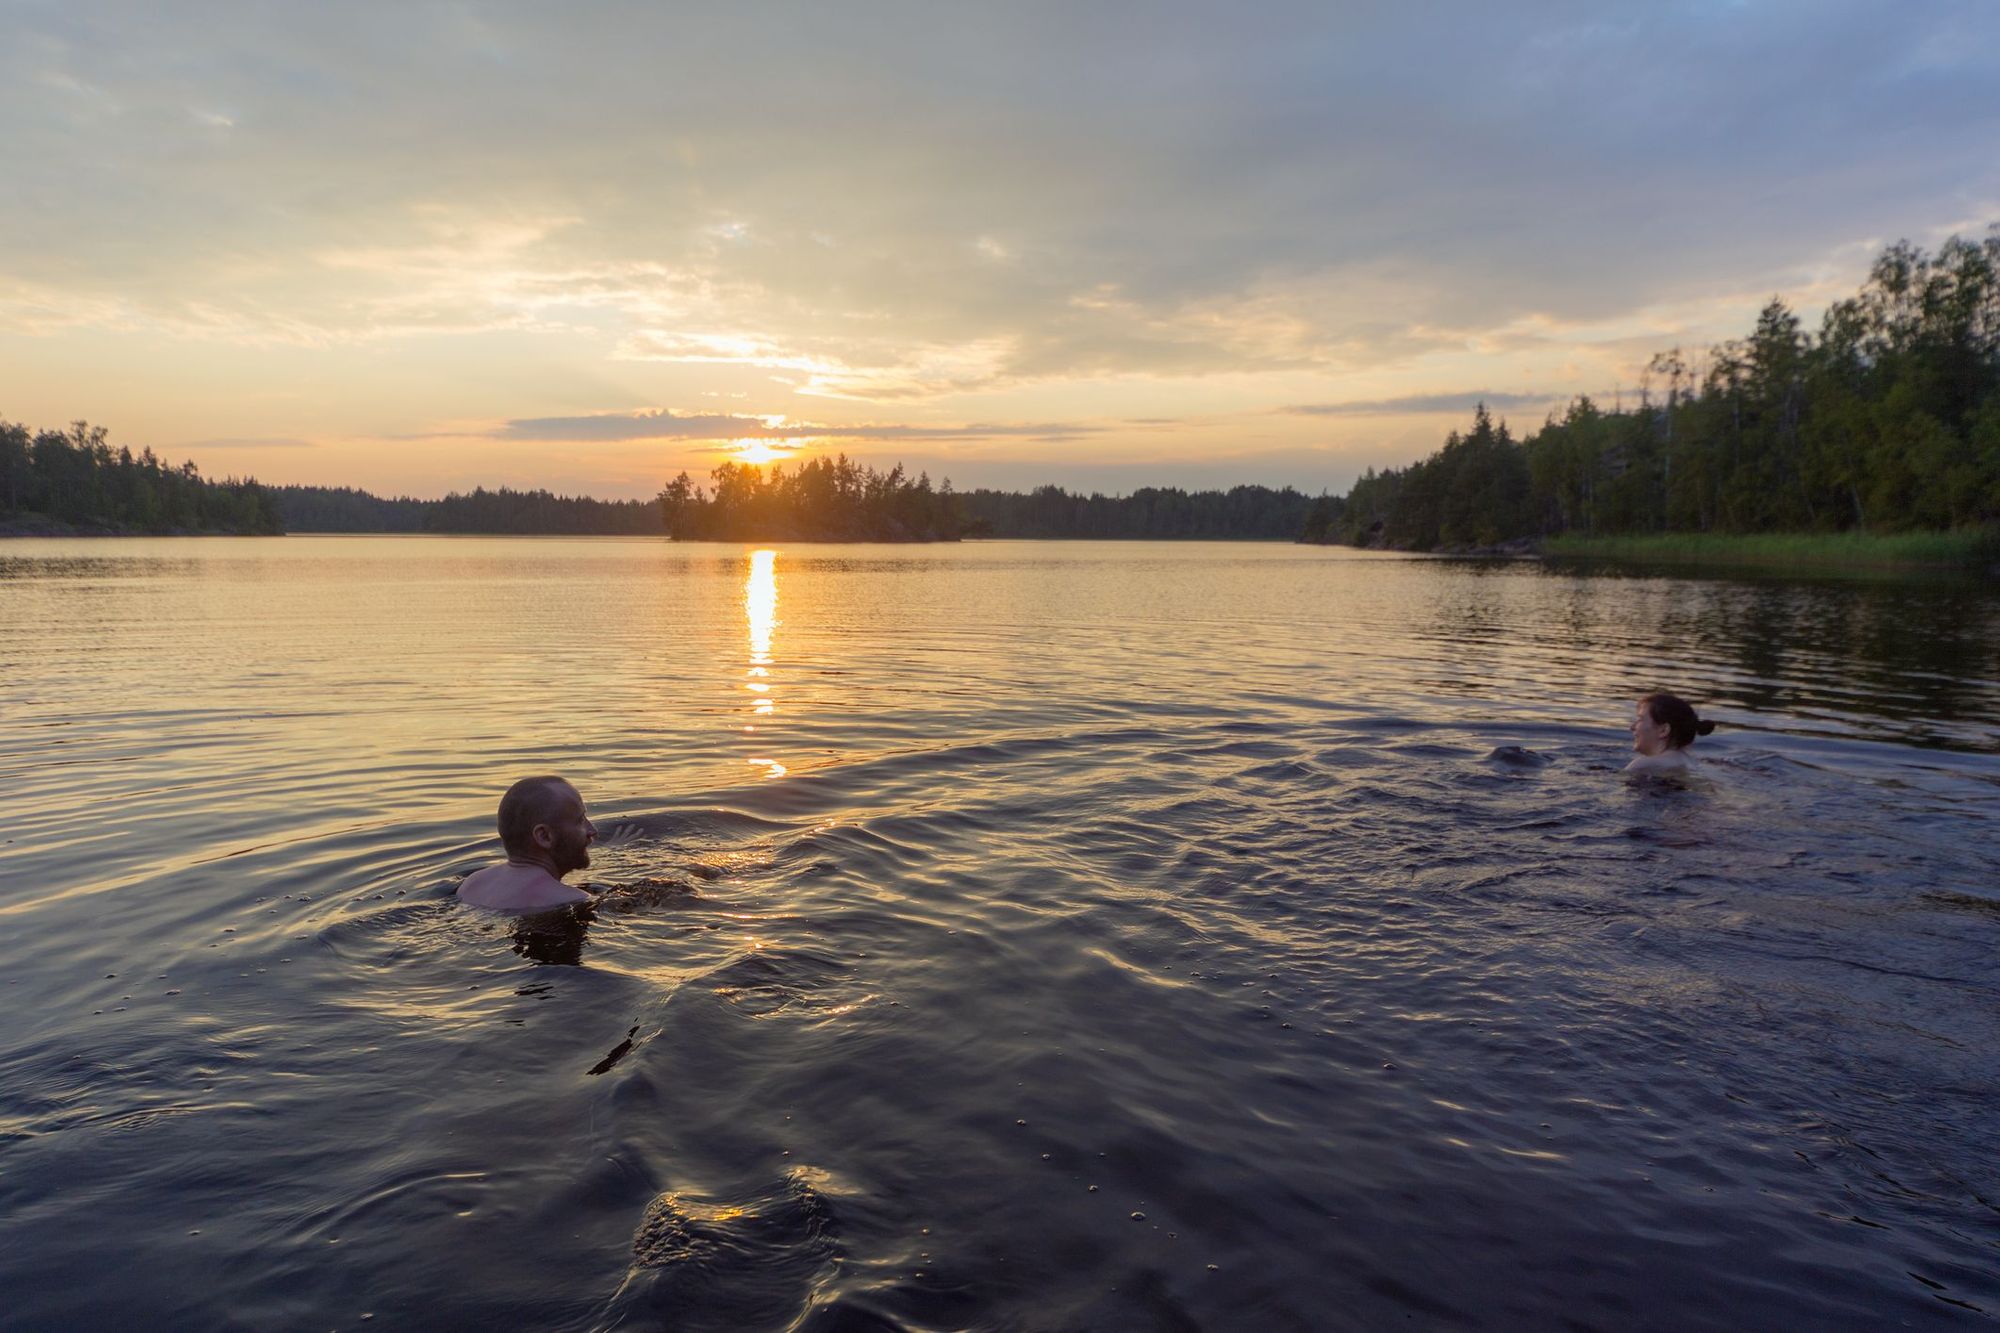 Swimmers in a lake at sunset.